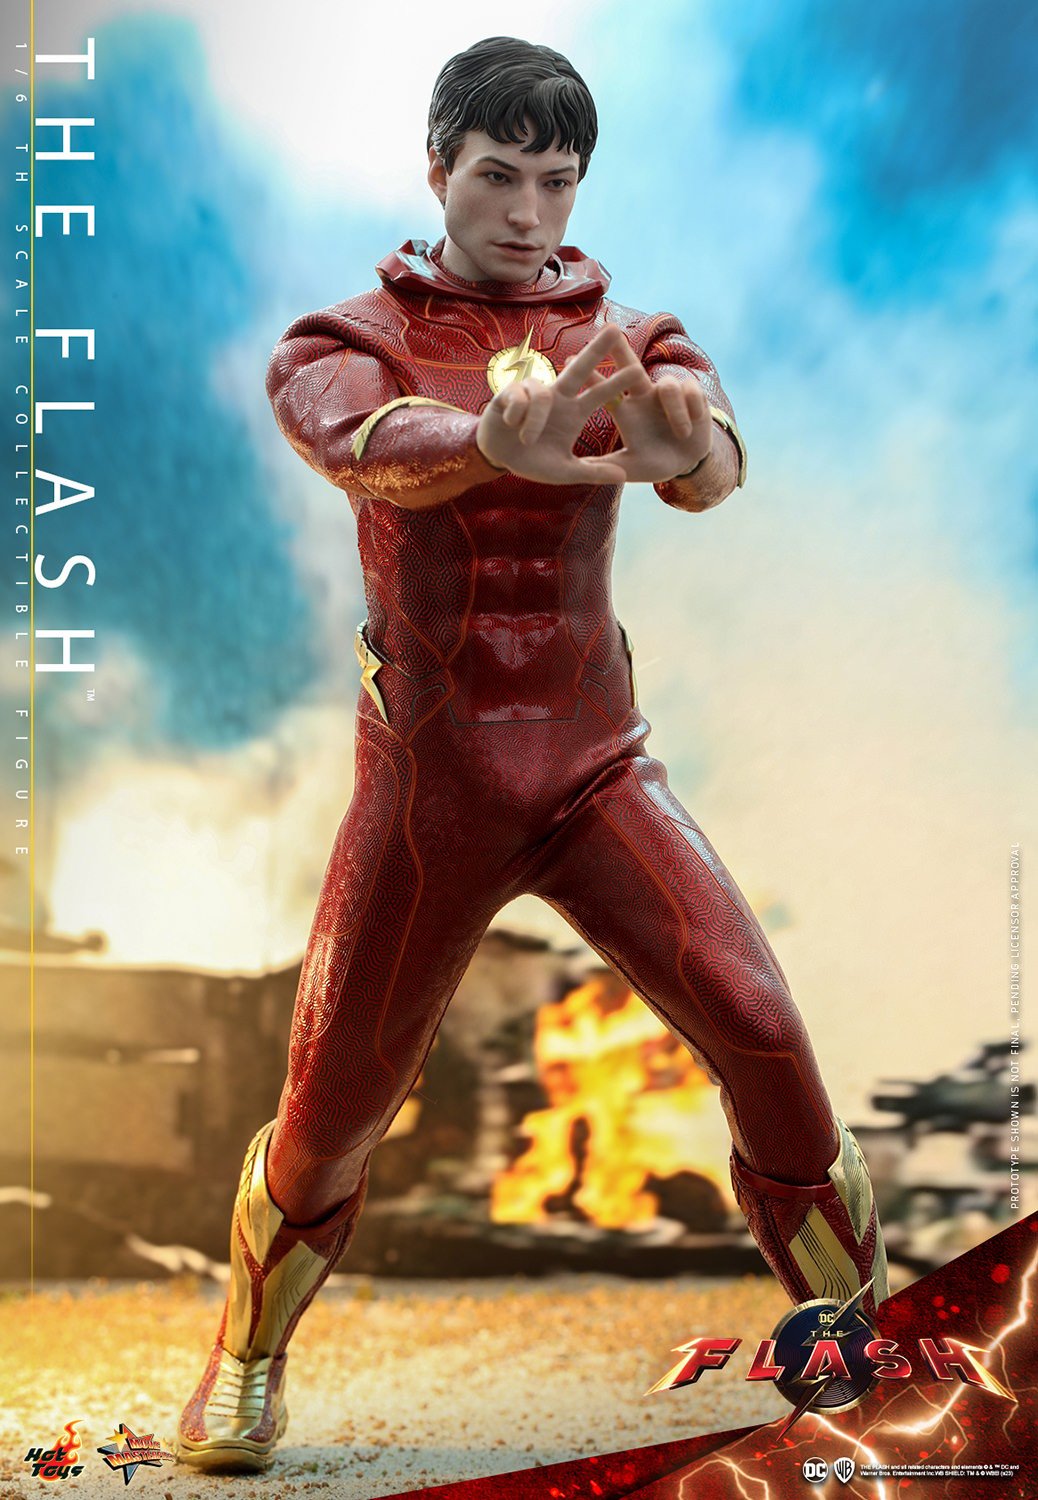 The Flash (Special Edition) (Prototype Shown) View 10